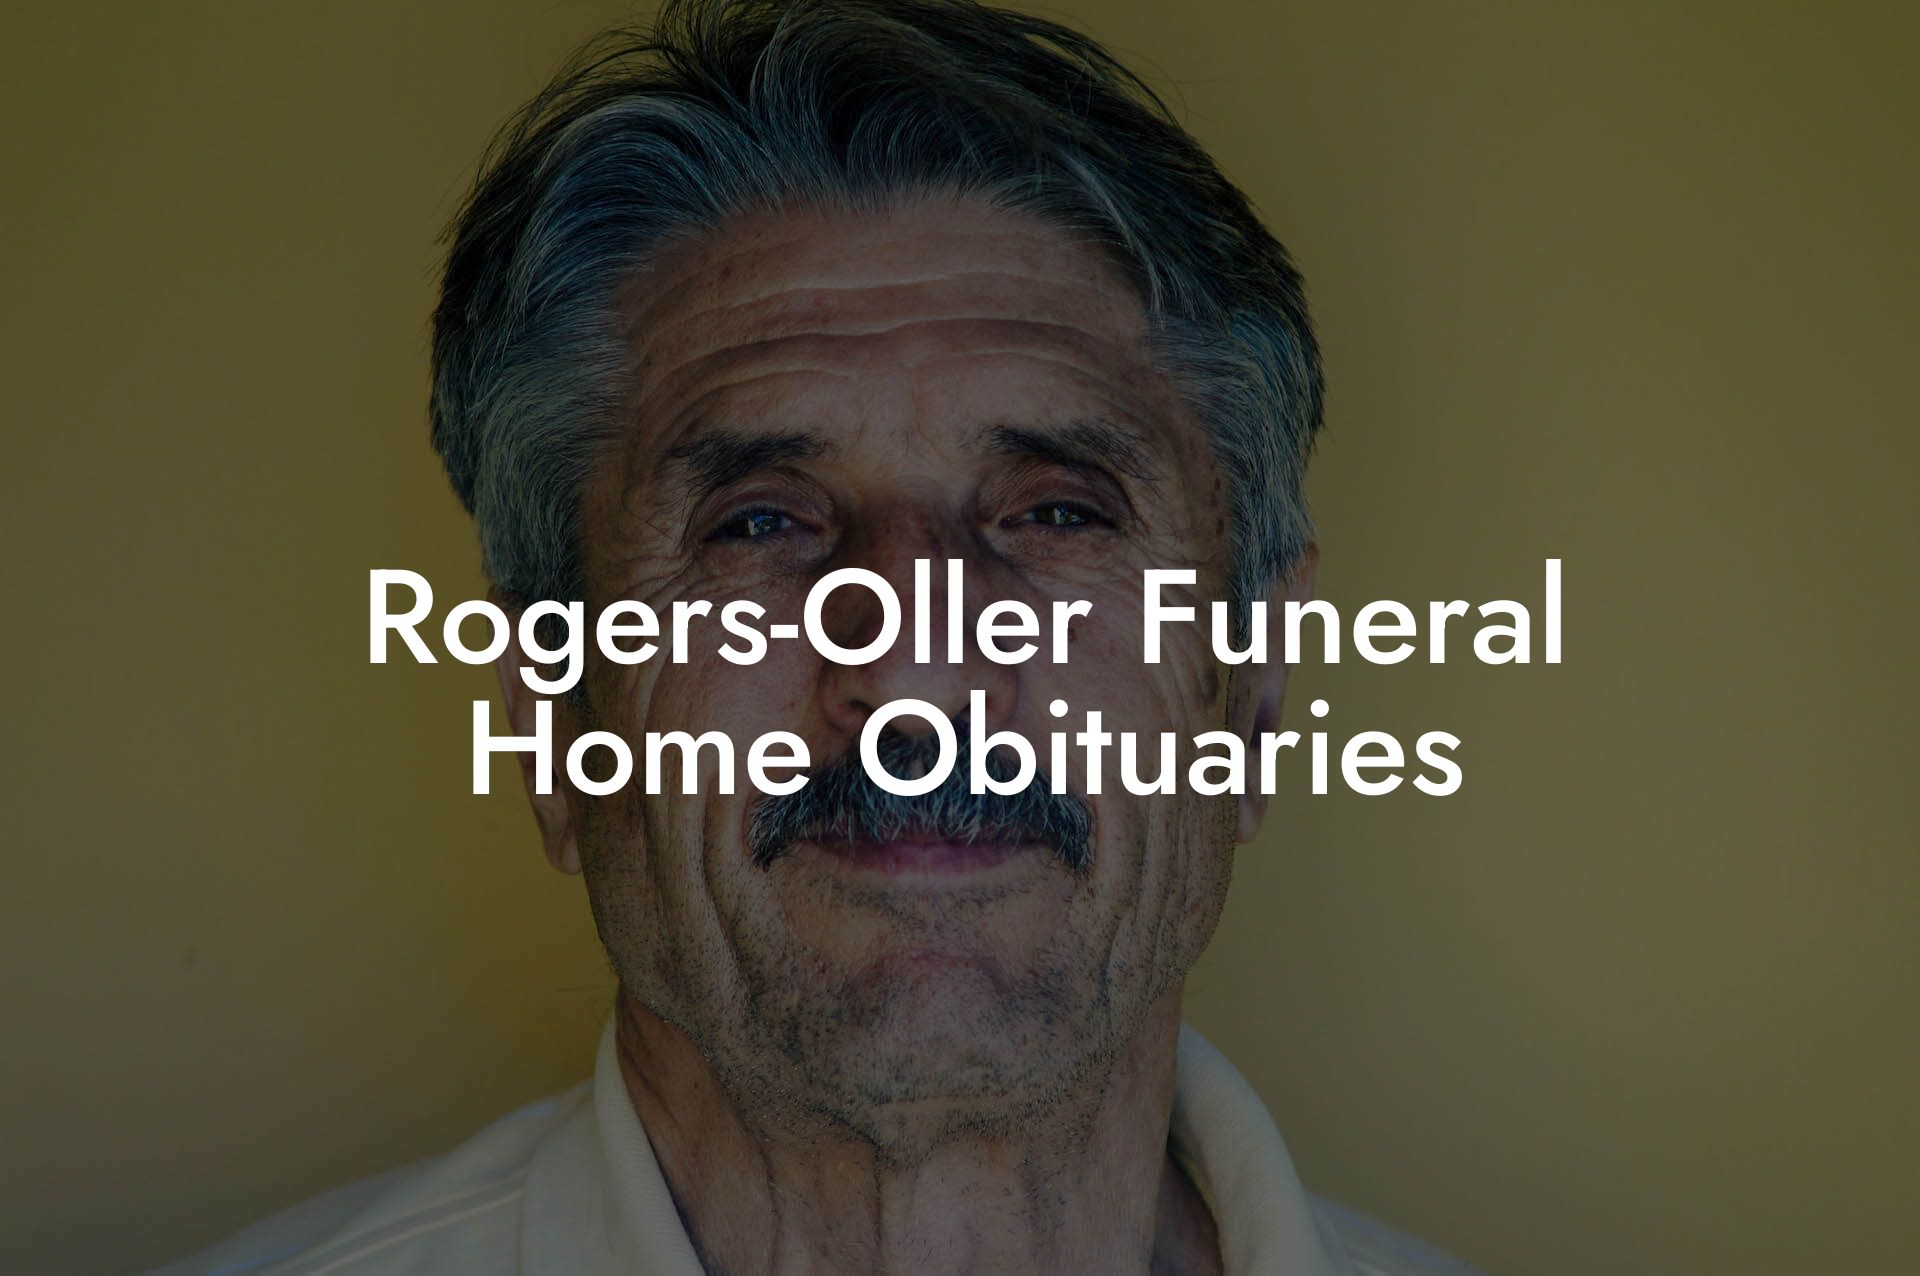 Rogers-Oller Funeral Home Obituaries